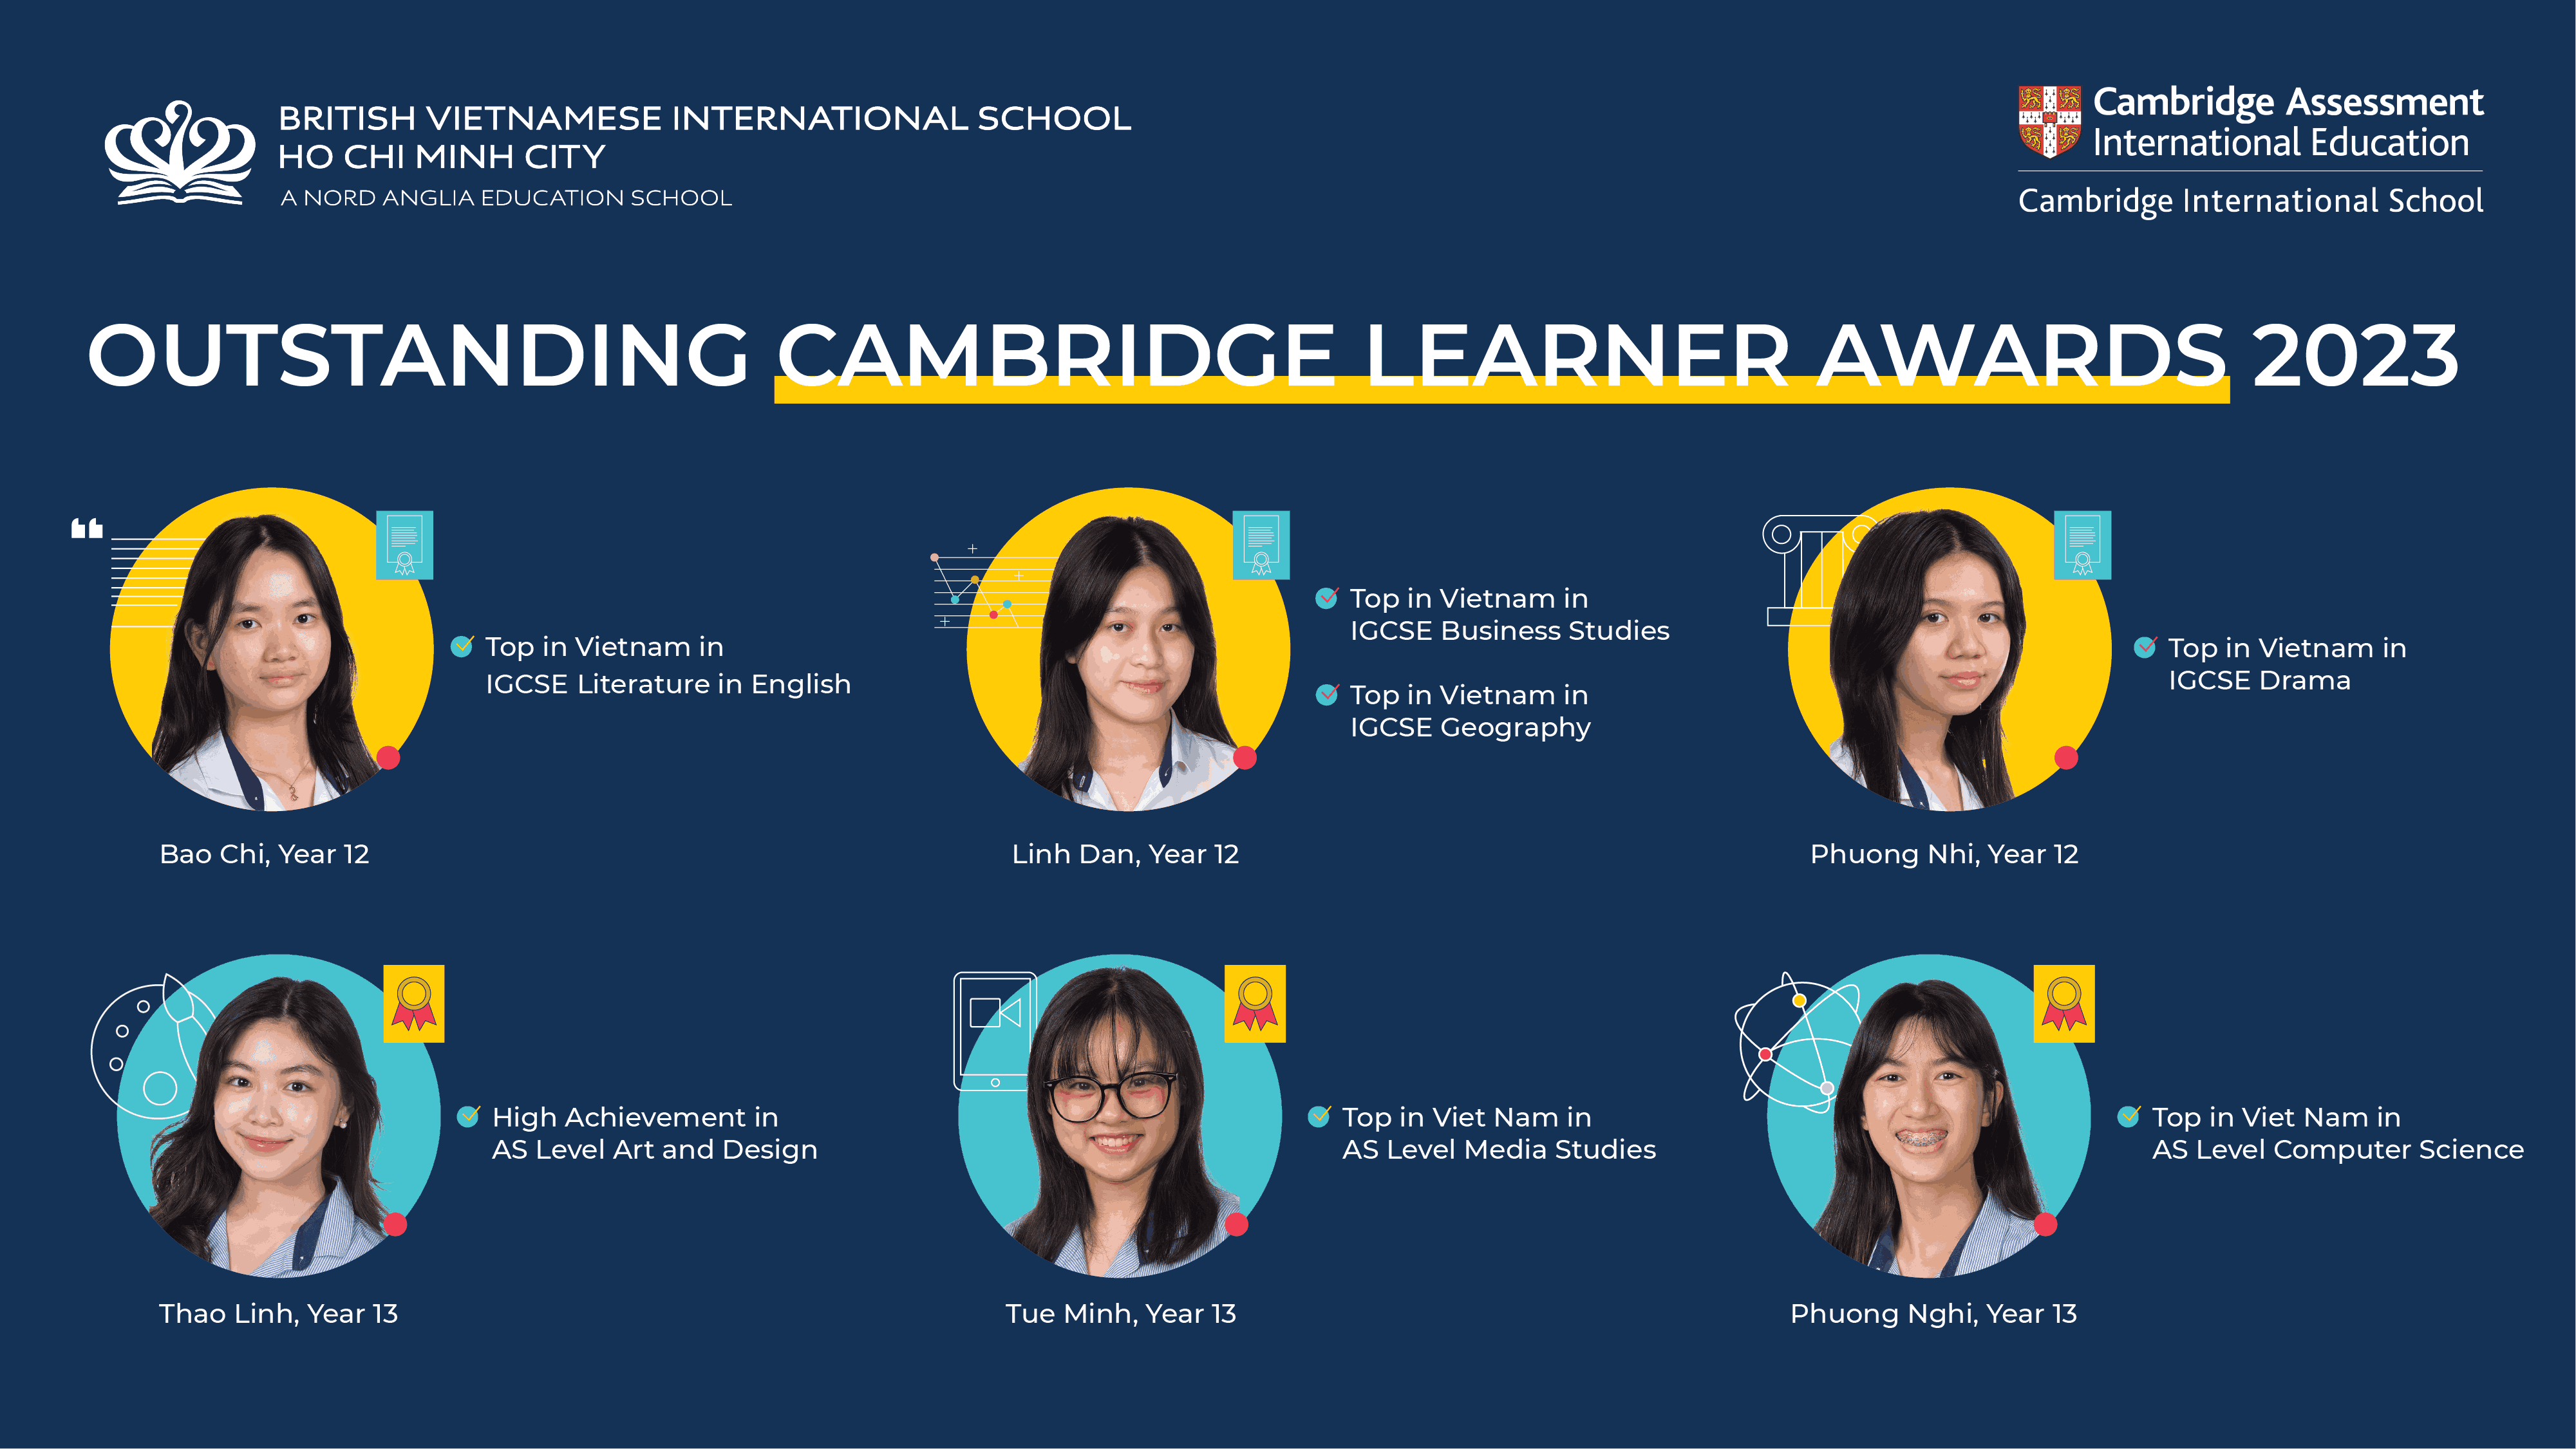 BVIS students achieved the Outstanding Cambridge Learner Awards with the top in Vietnam results - BVIS students achieved the Outstanding Cambridge Learner Awards with the top in Vietnam results